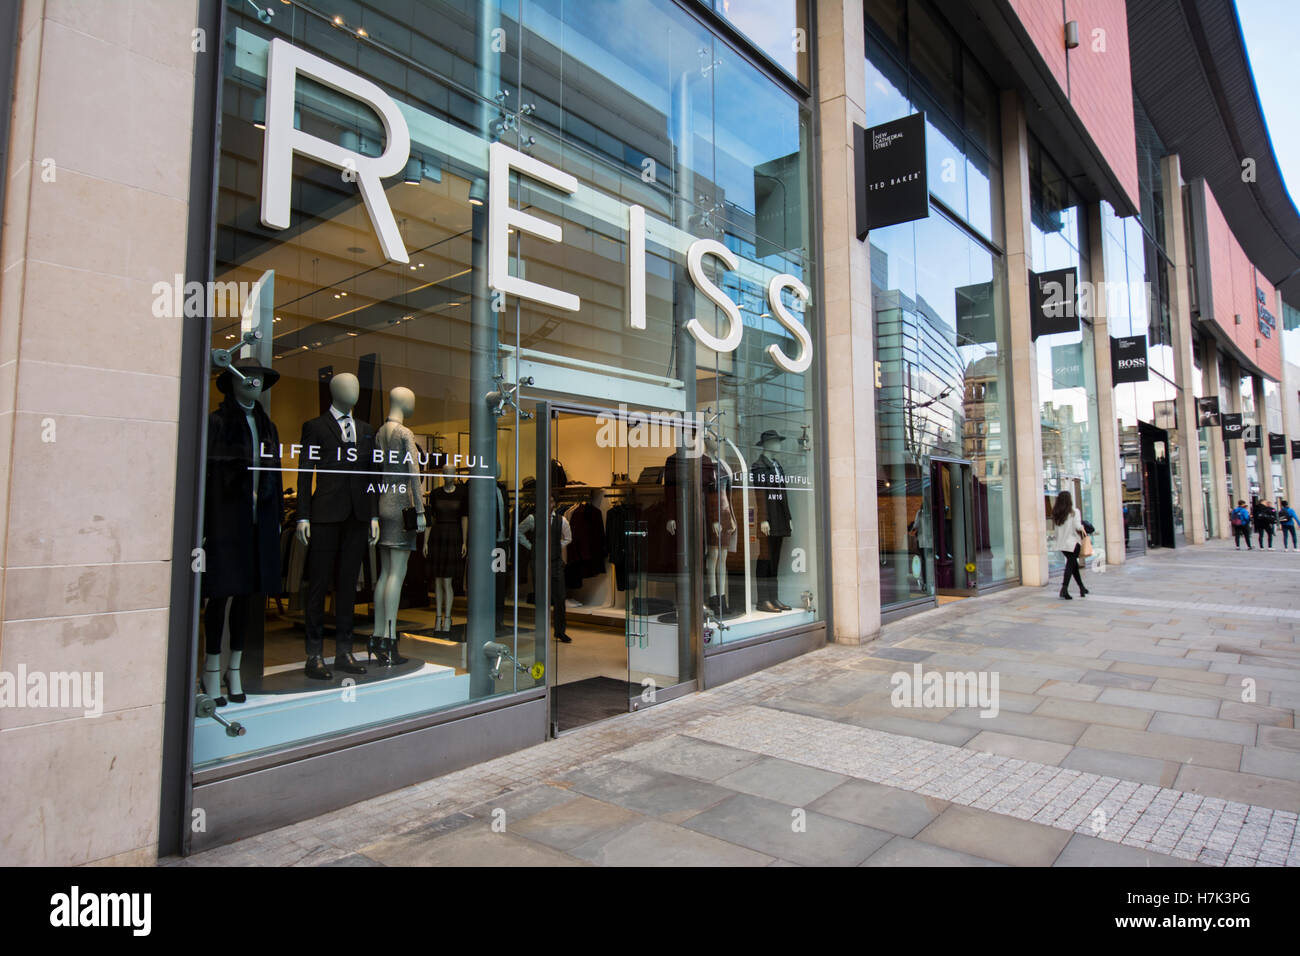 REISS iconic fashion clothing shop in Manchester Stock Photo - Alamy